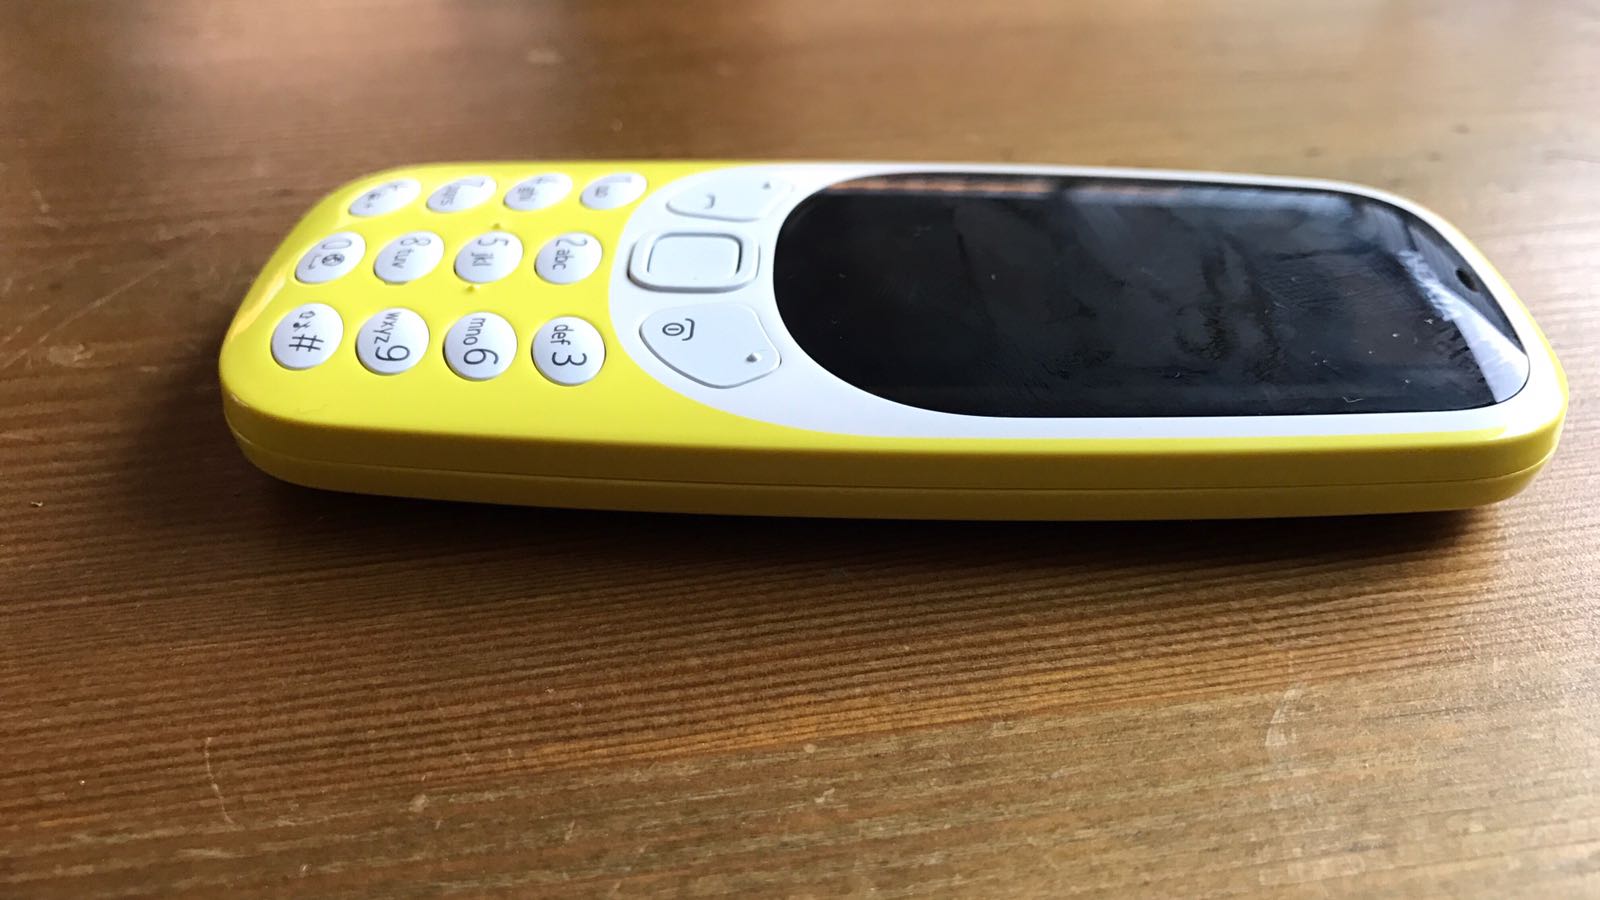 Nokia 3310 in Pictures